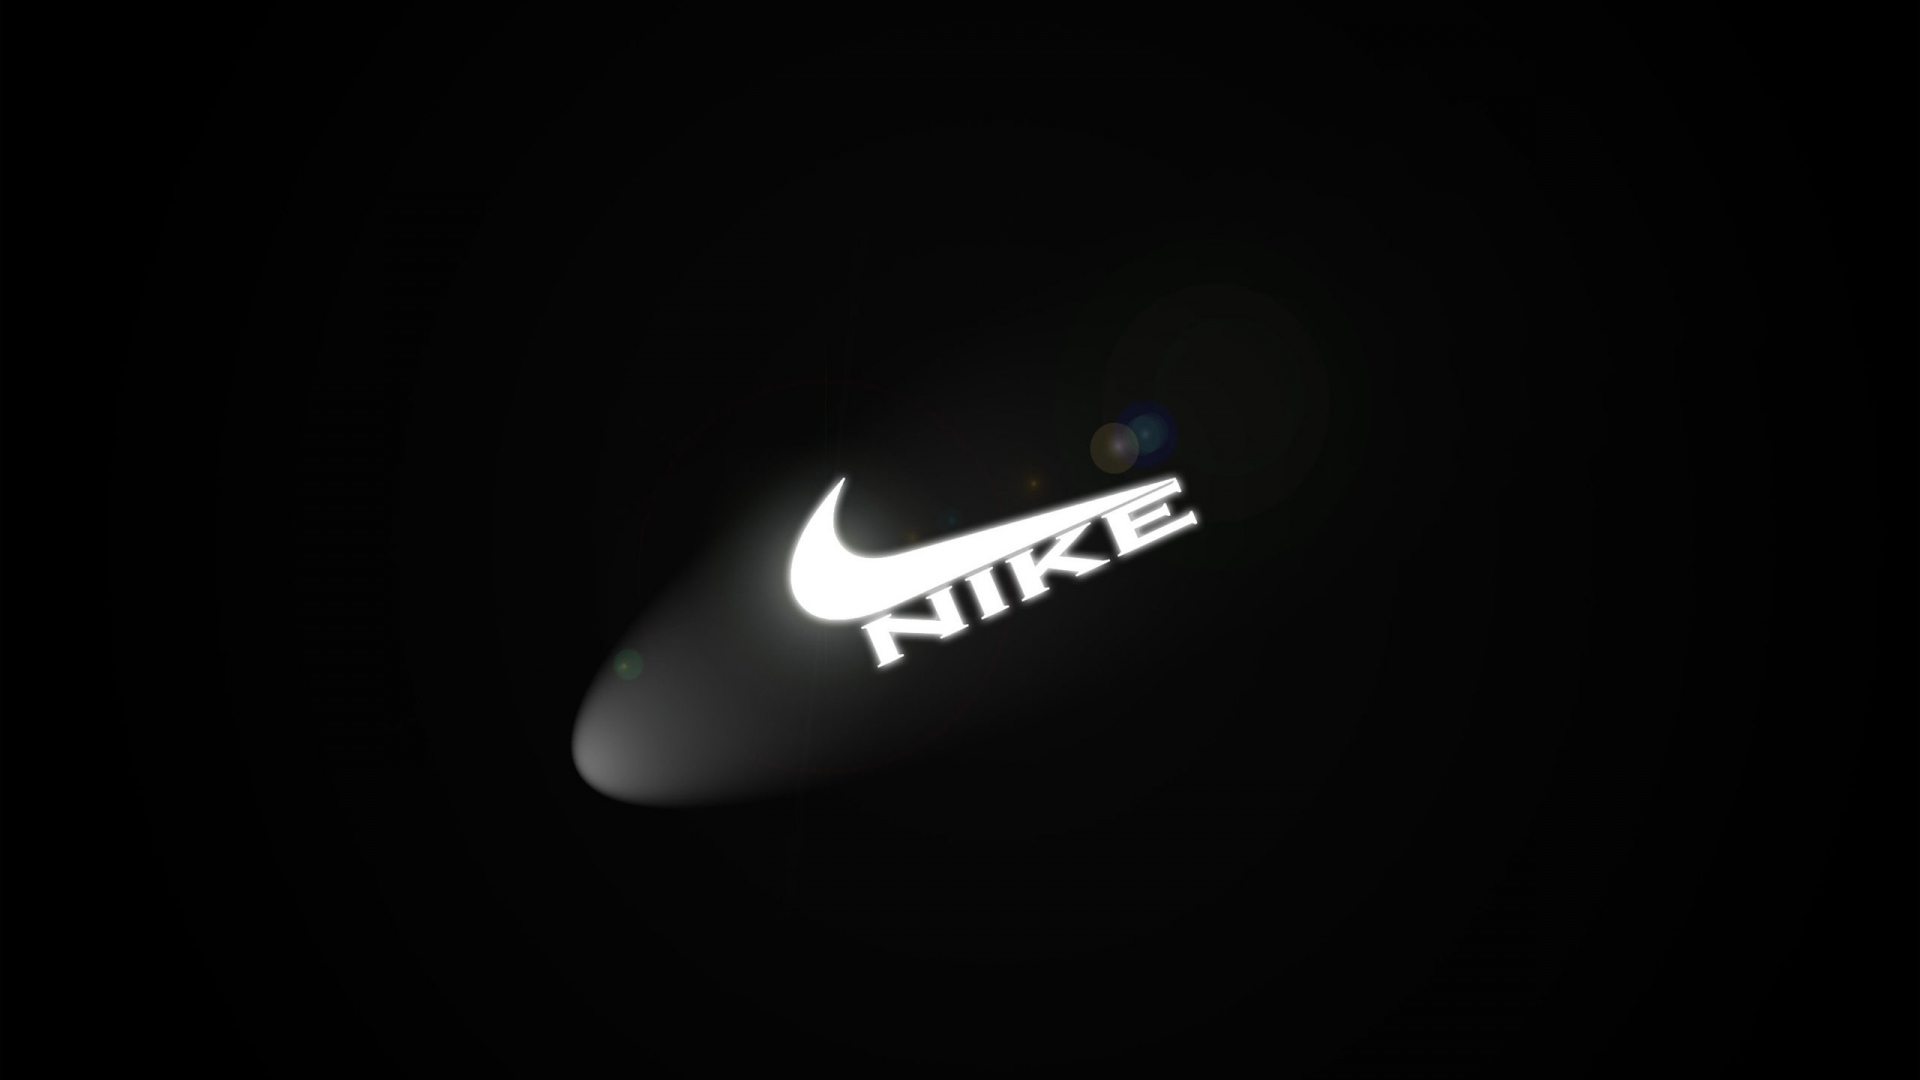 Products Nike HD Wallpaper | Background Image